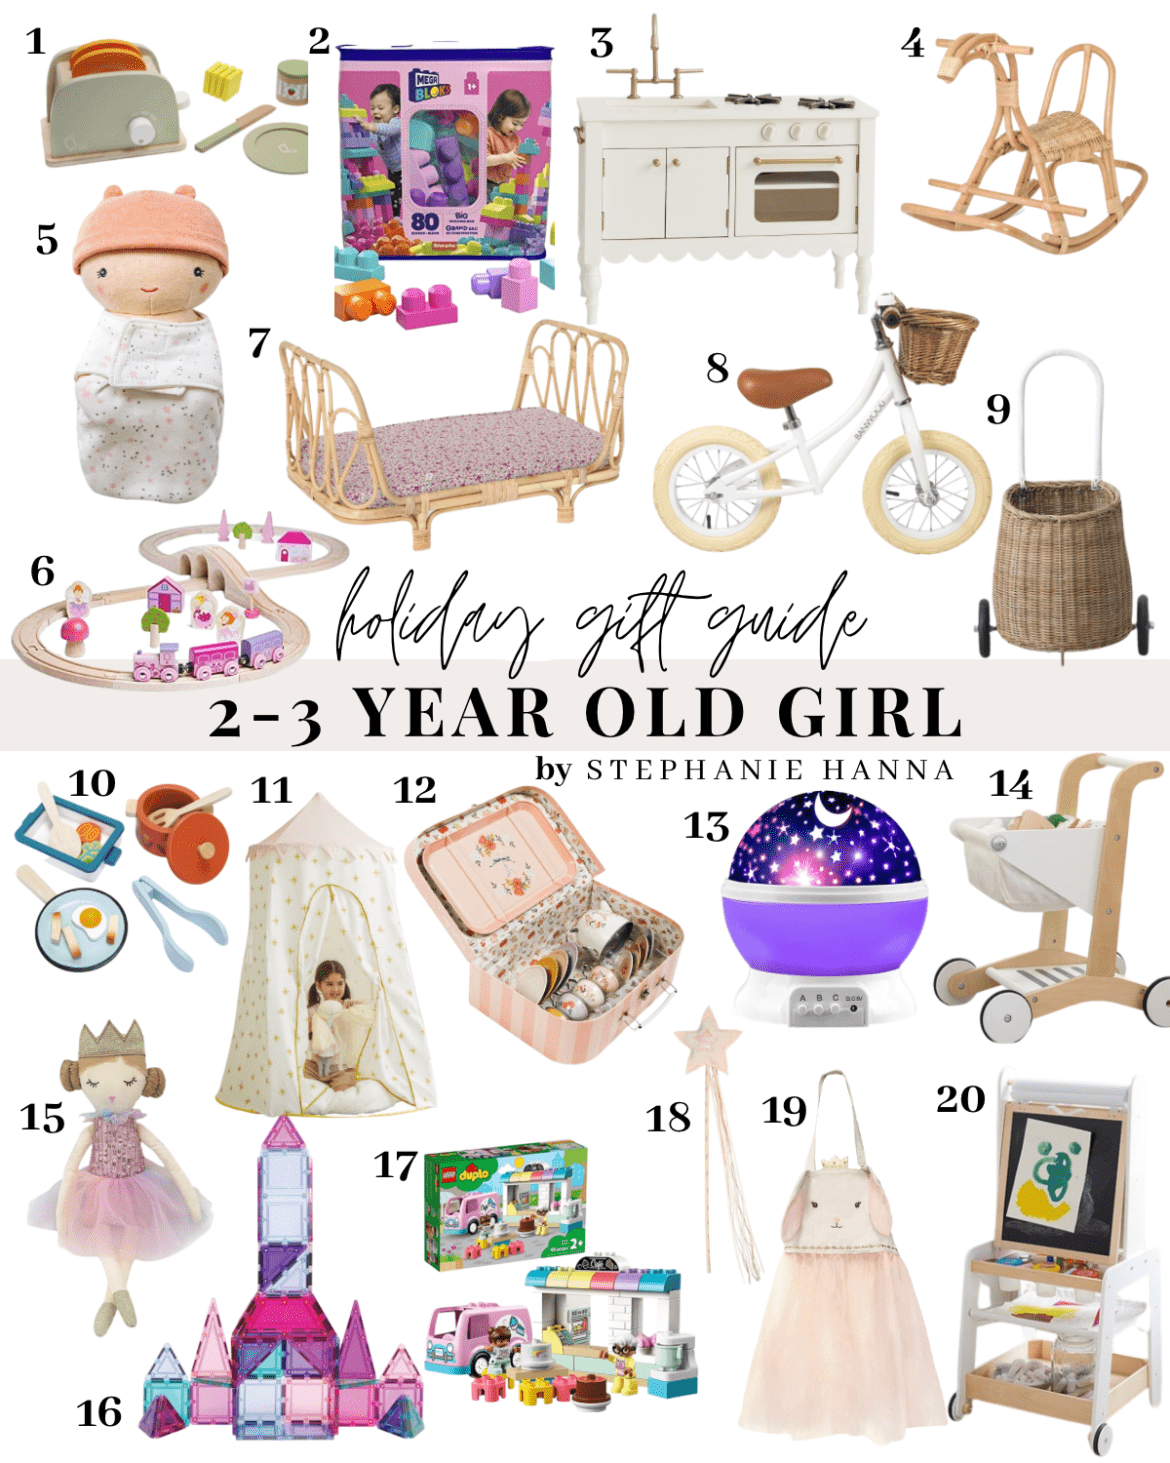 2-3 year old girl gift guide